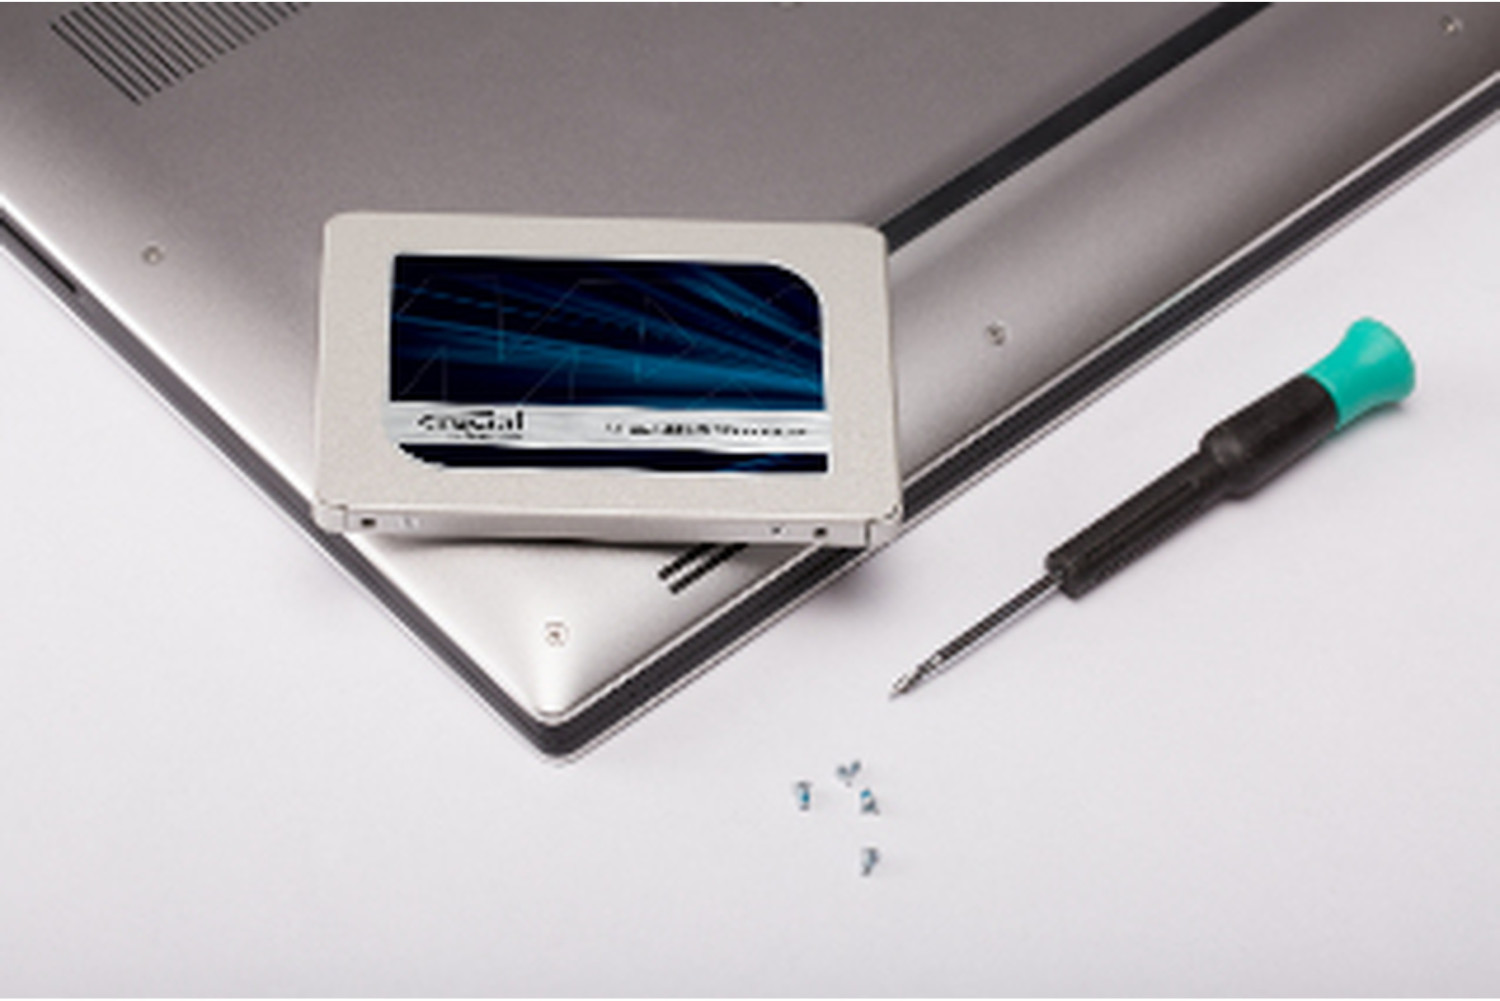 Disque Crucial SSD MX500 1To 2.5” - Tunewtec Tunisie